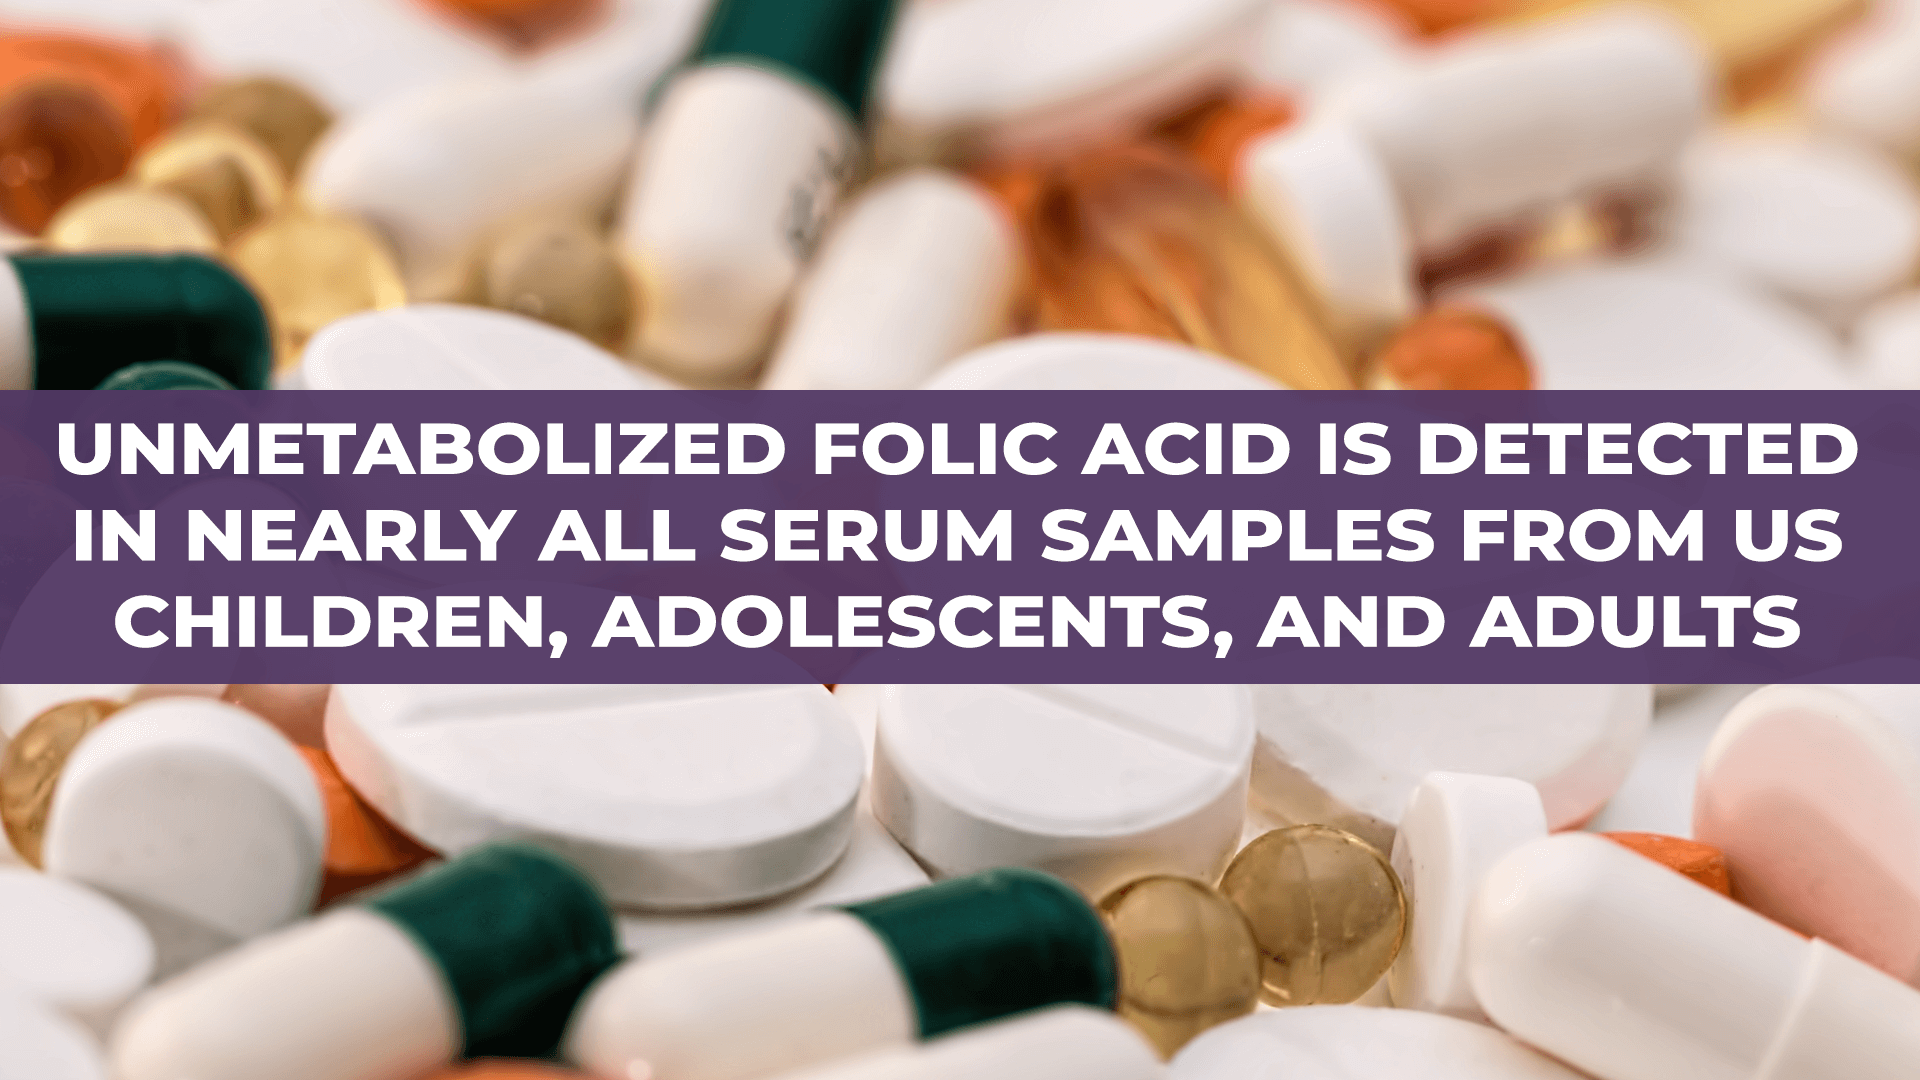 Unmetabolized Folic Acid Is Detected in Nearly All Serum Samples from US Children, Adolescents, and Adults